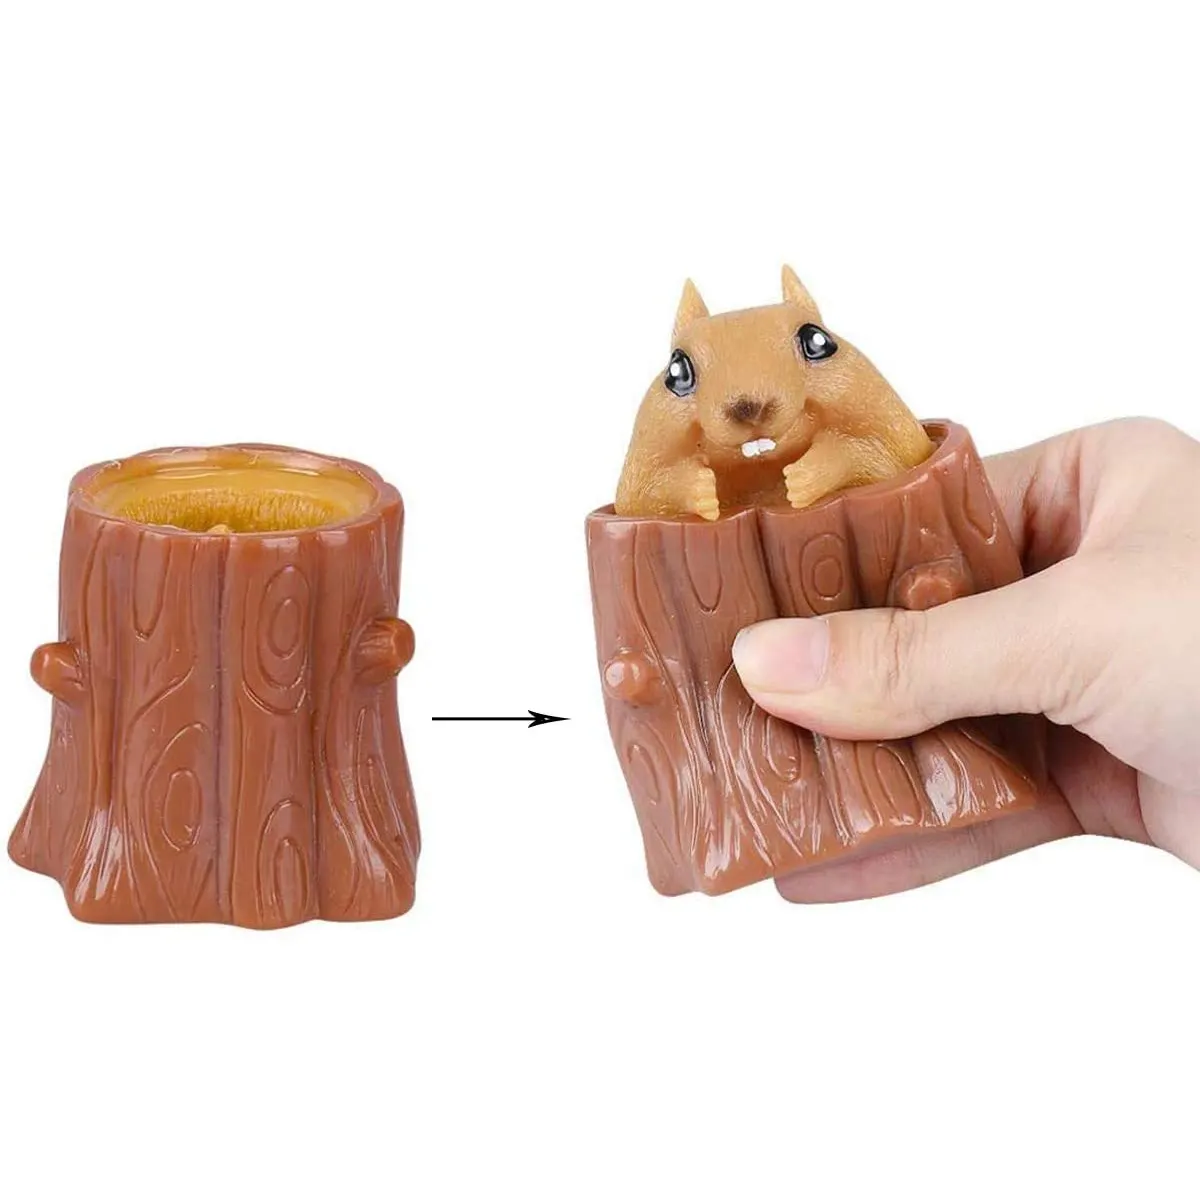 Squeeze Decompression Squirrel Cup Sensory Fidget Toys Squishy Toy Stress Relief Kids Adult Tricky Funny Squeeze Toys